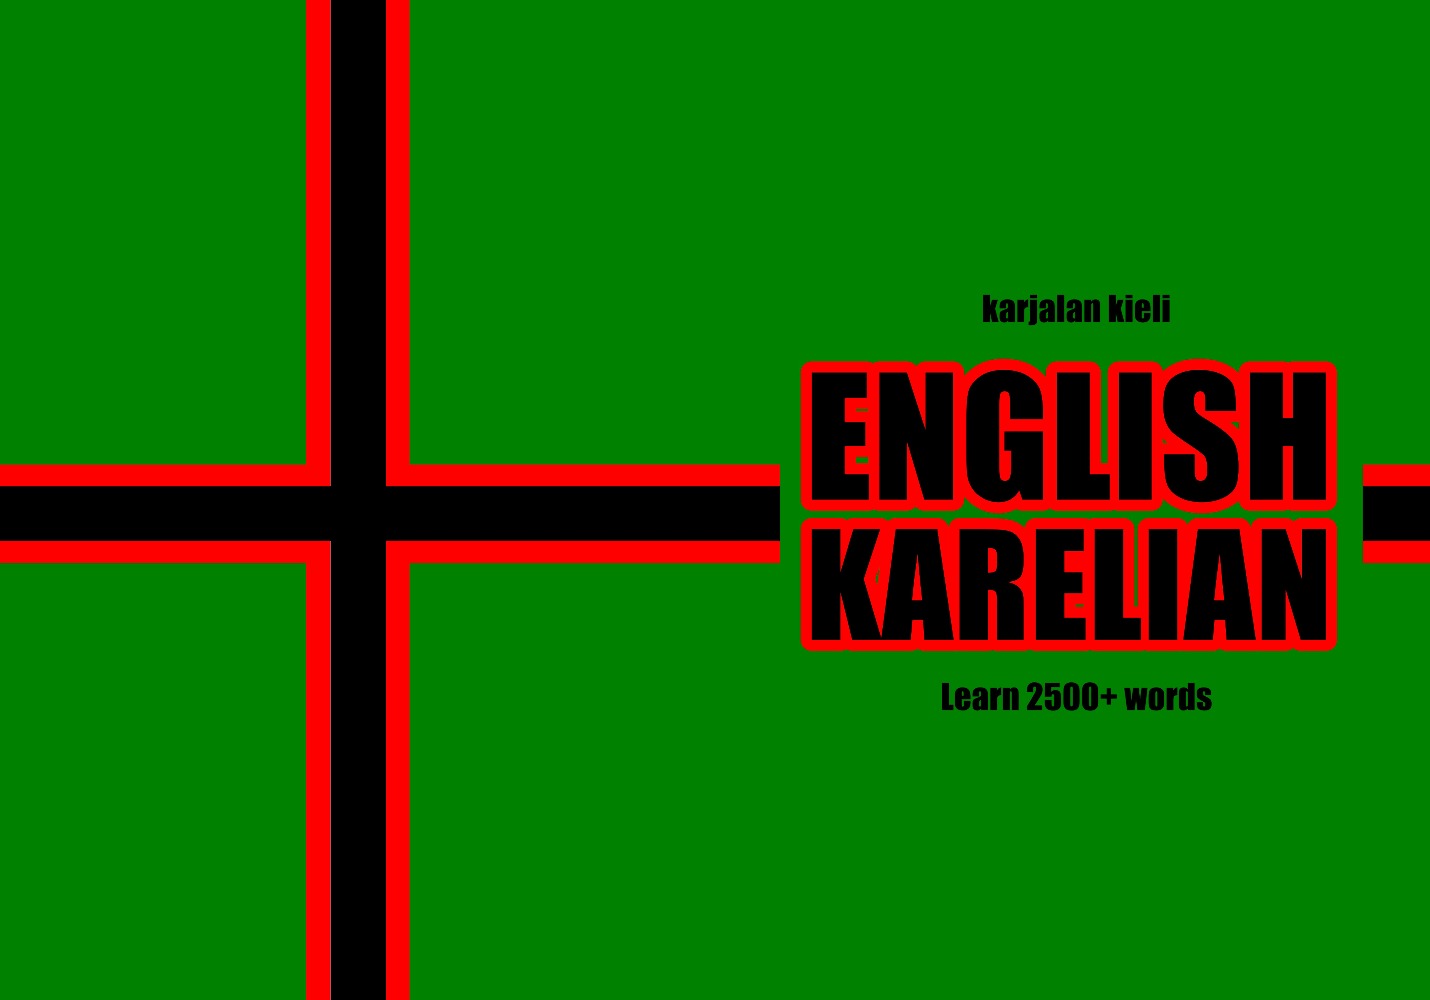 Karelian language learning notebook cover